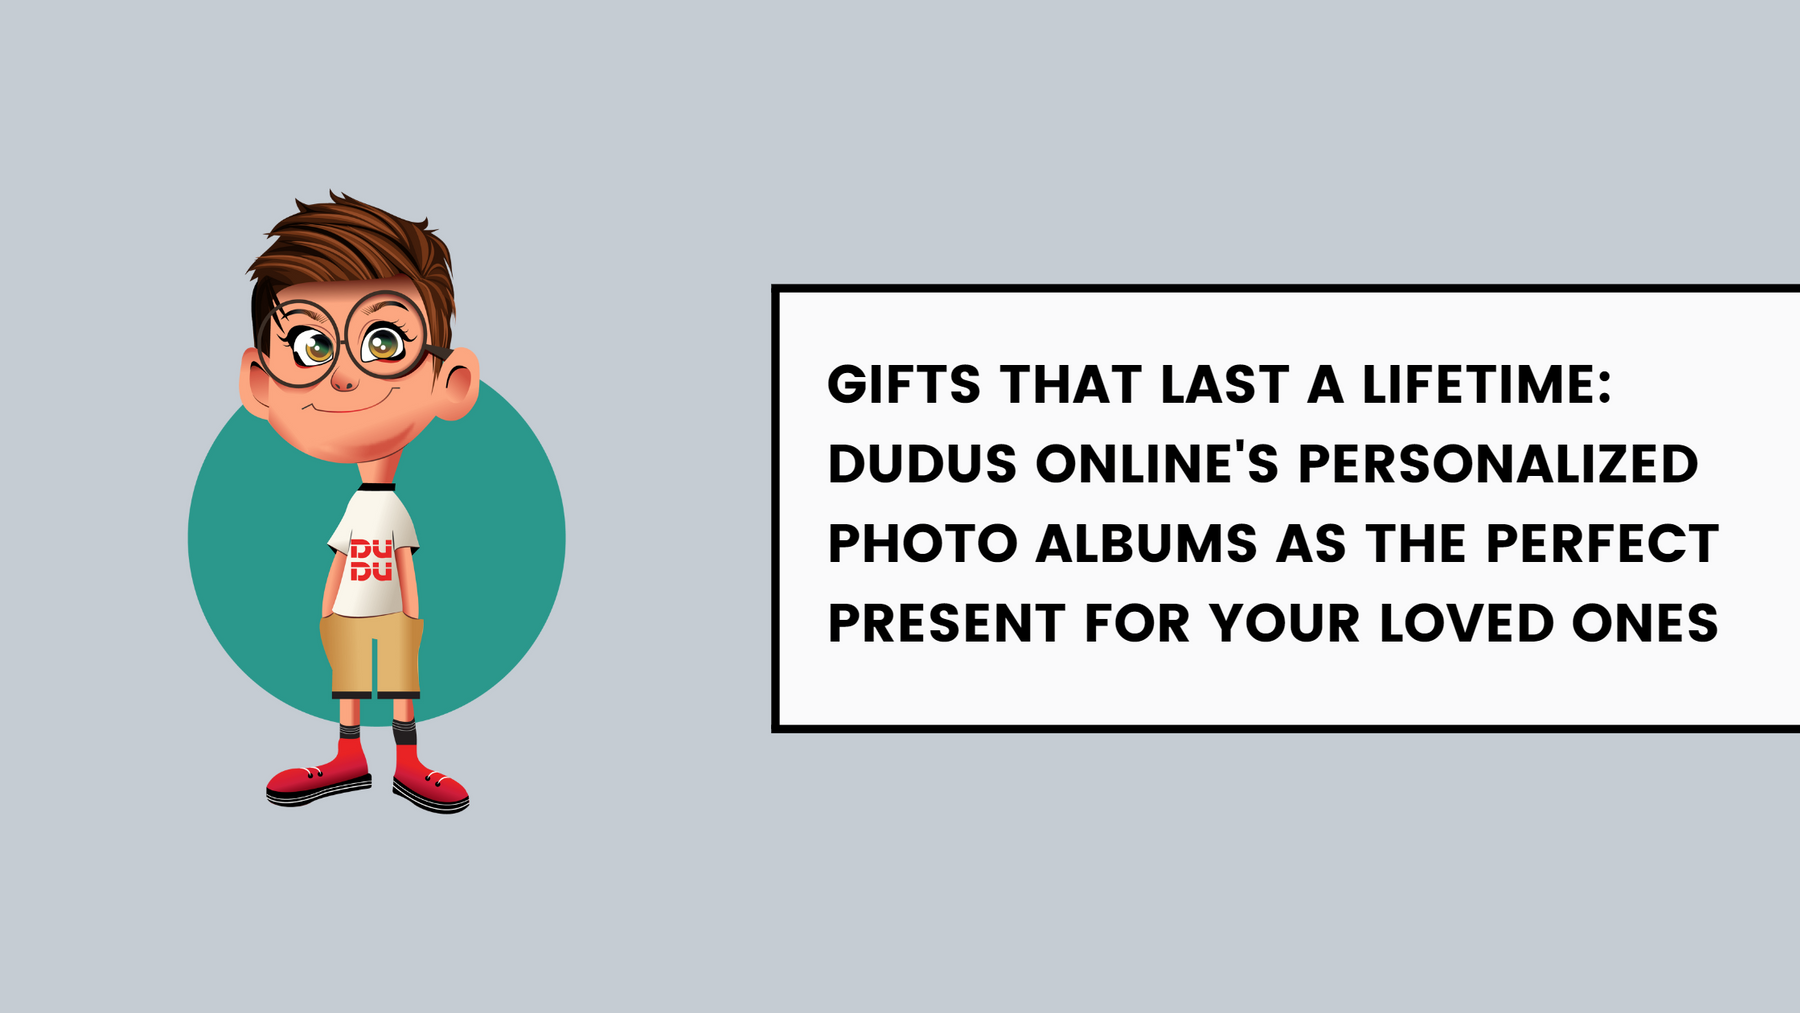 Gifts That Last a Lifetime: Dudus Online's Personalized Photo Albums as the Perfect Present for Your Loved Ones